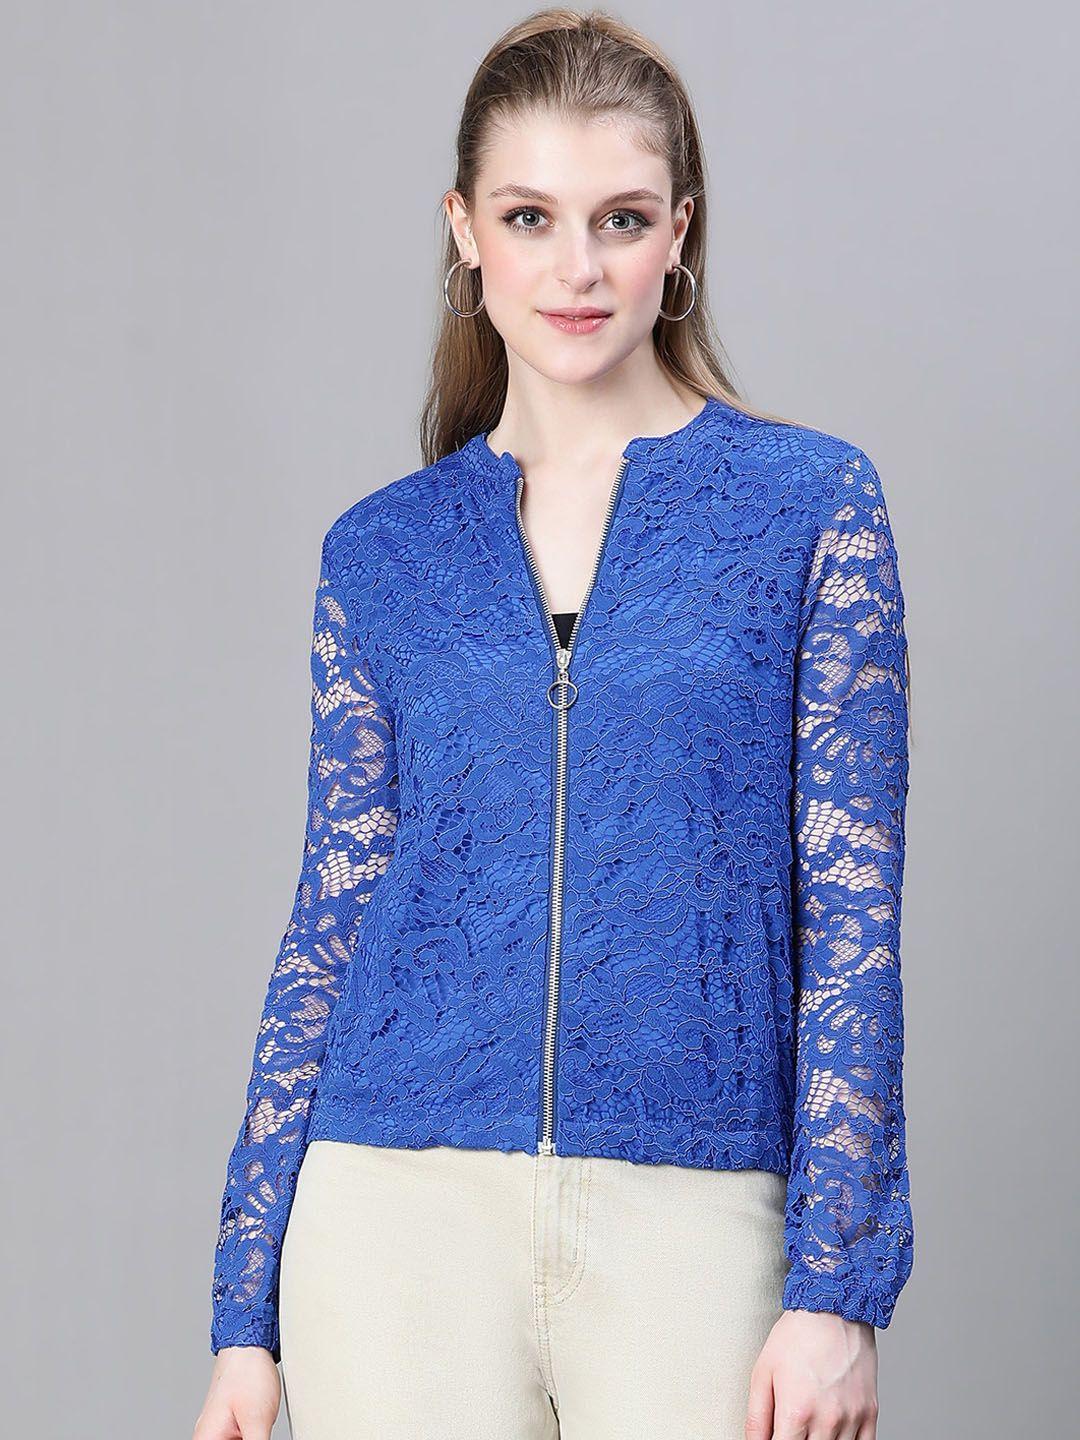 oxolloxo self design lace detail lightweight tailored jacket